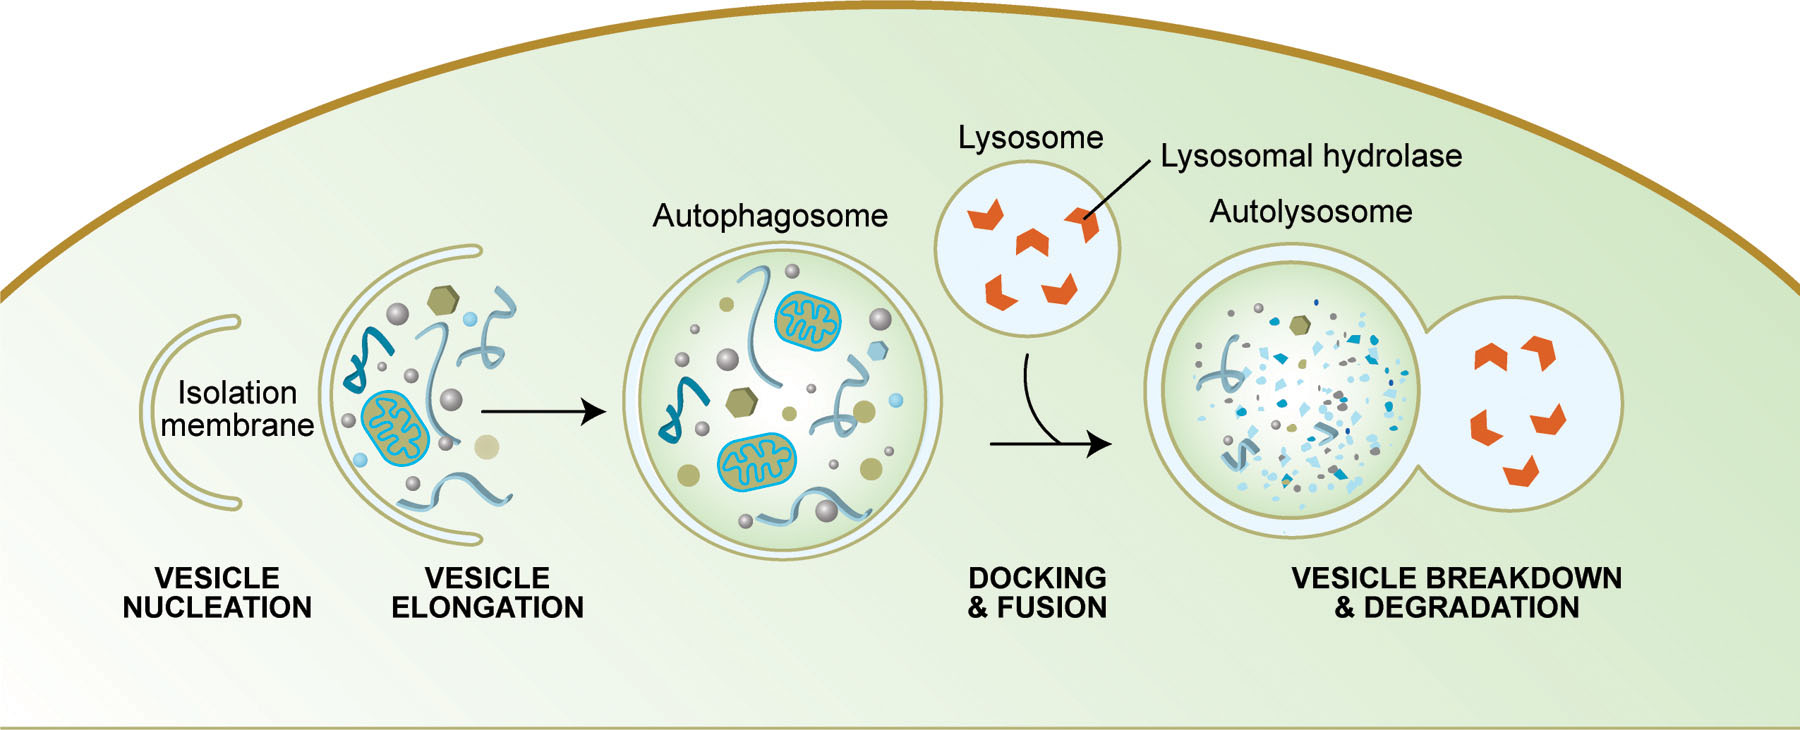 illustration of the process of autophagy